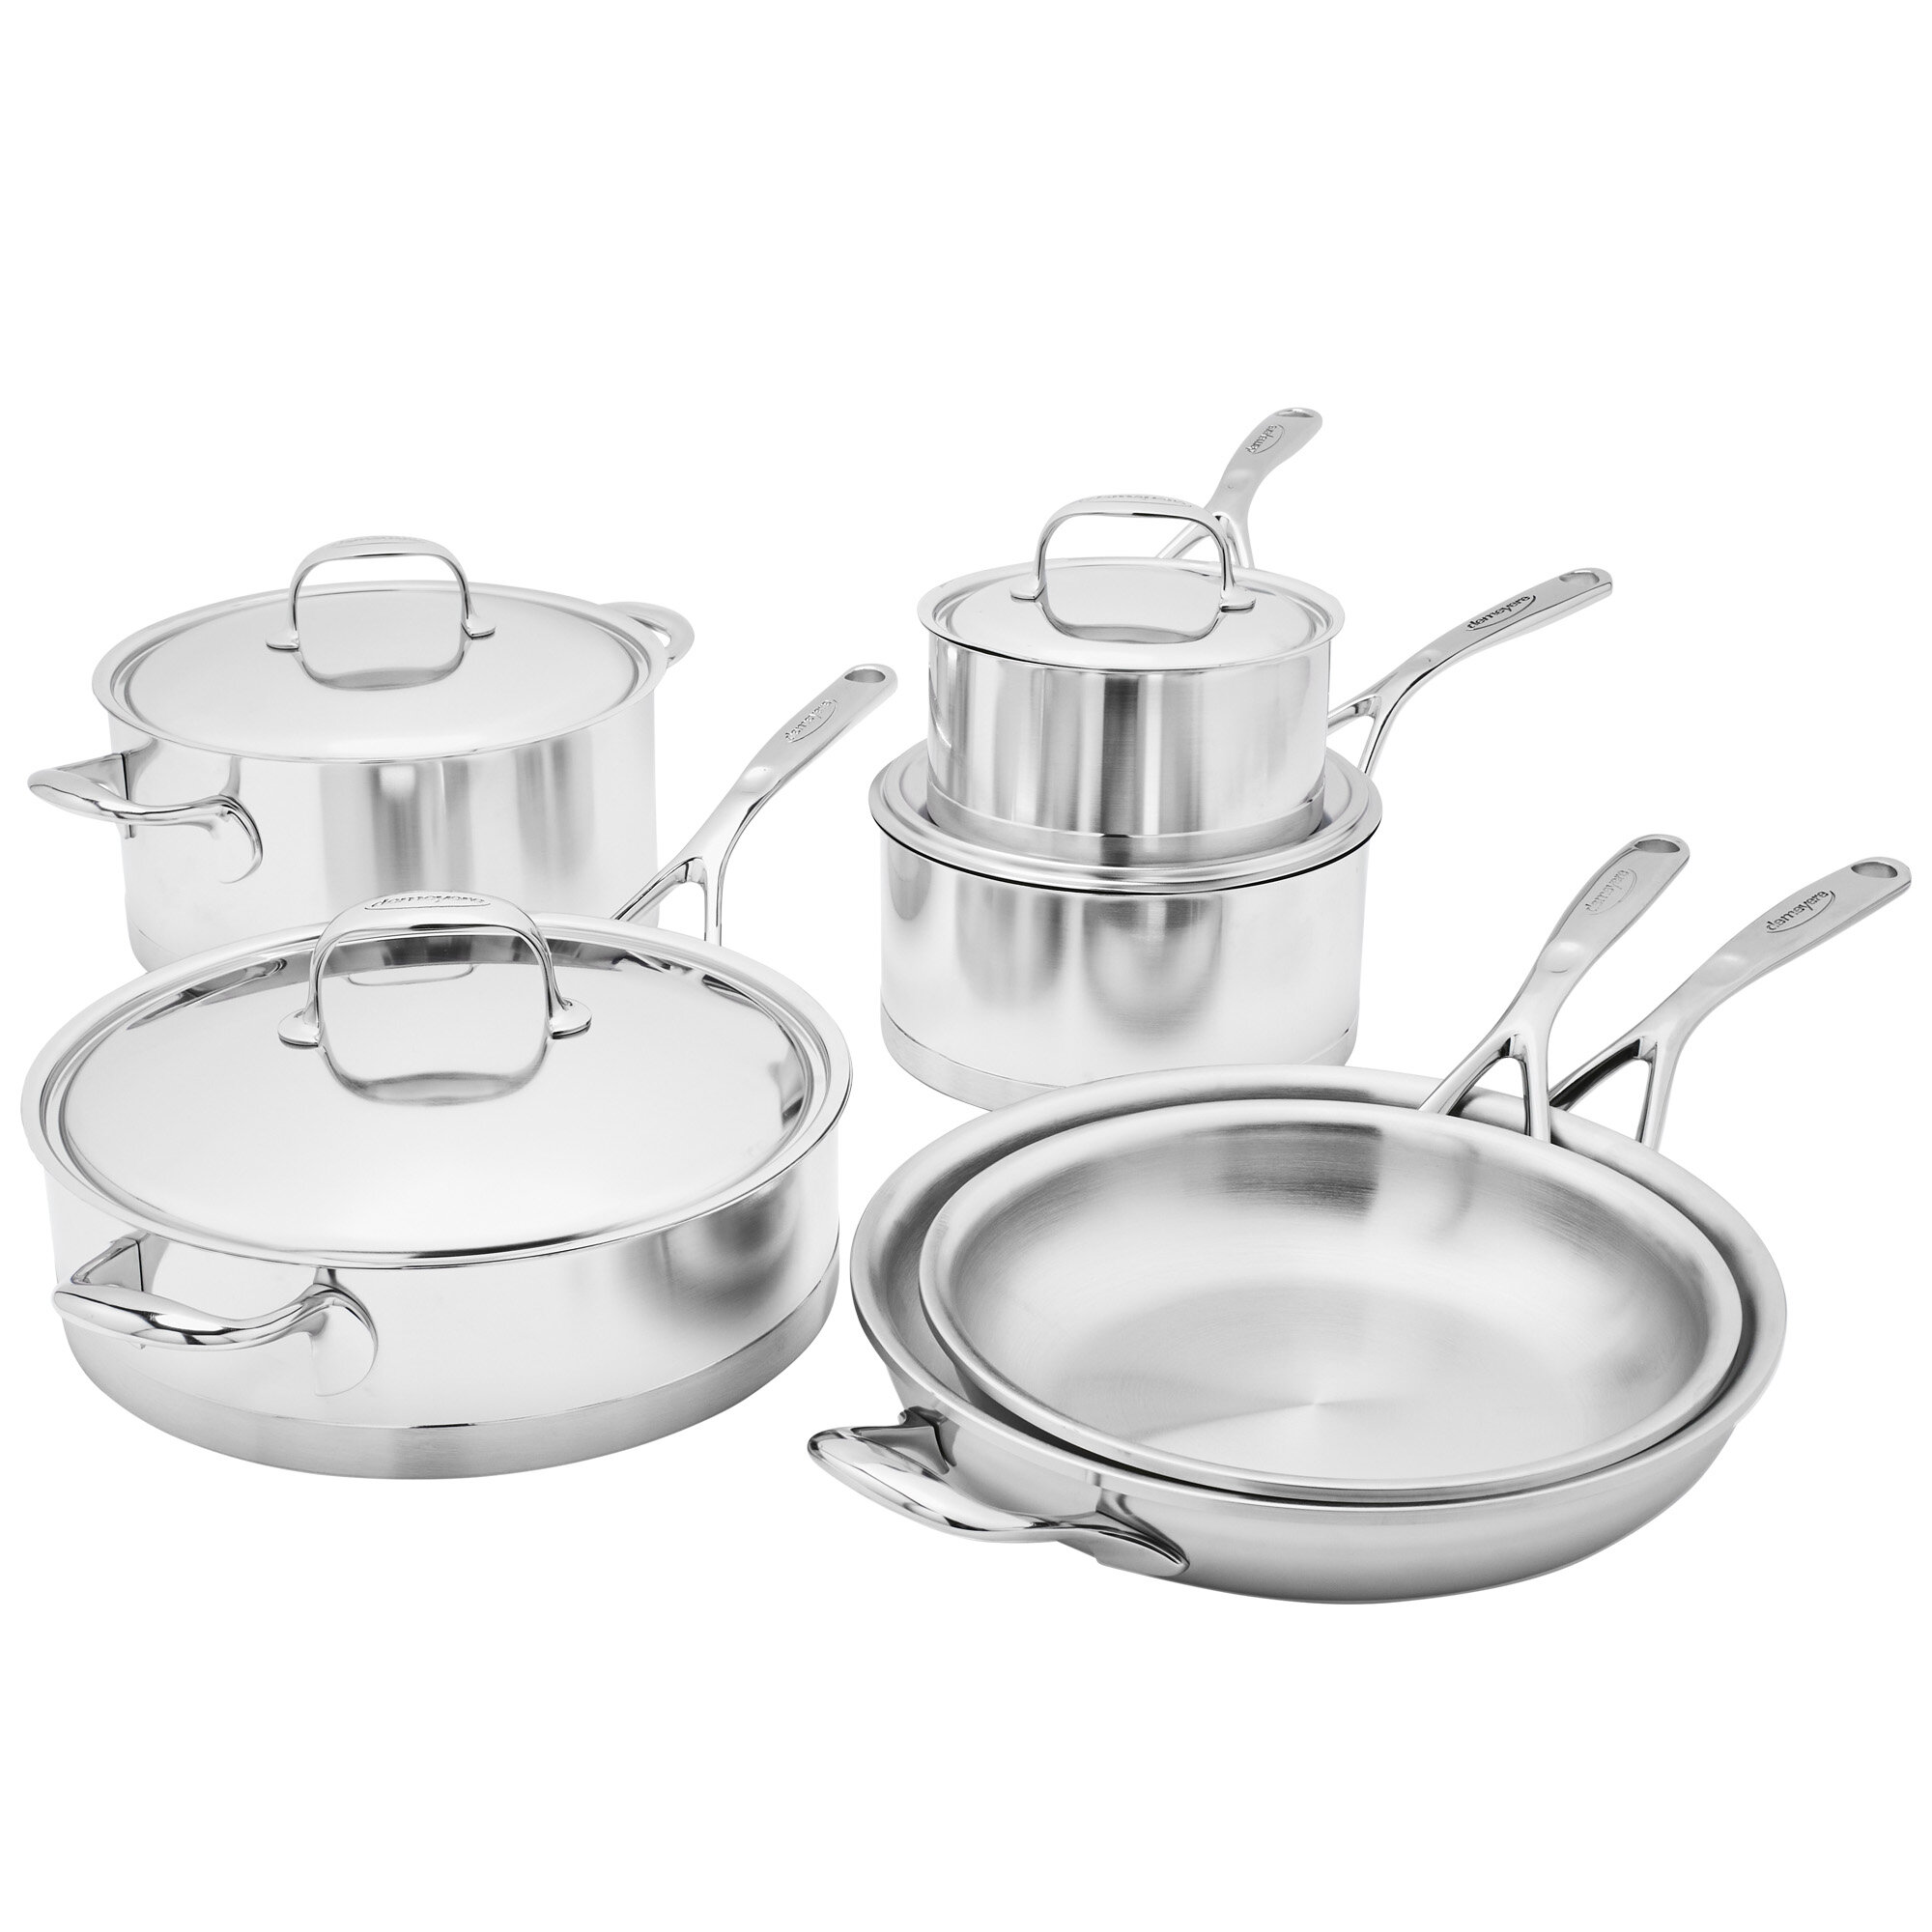 Demeyere Industry 5-Ply Stainless Steel Cookware Set, Set of 10